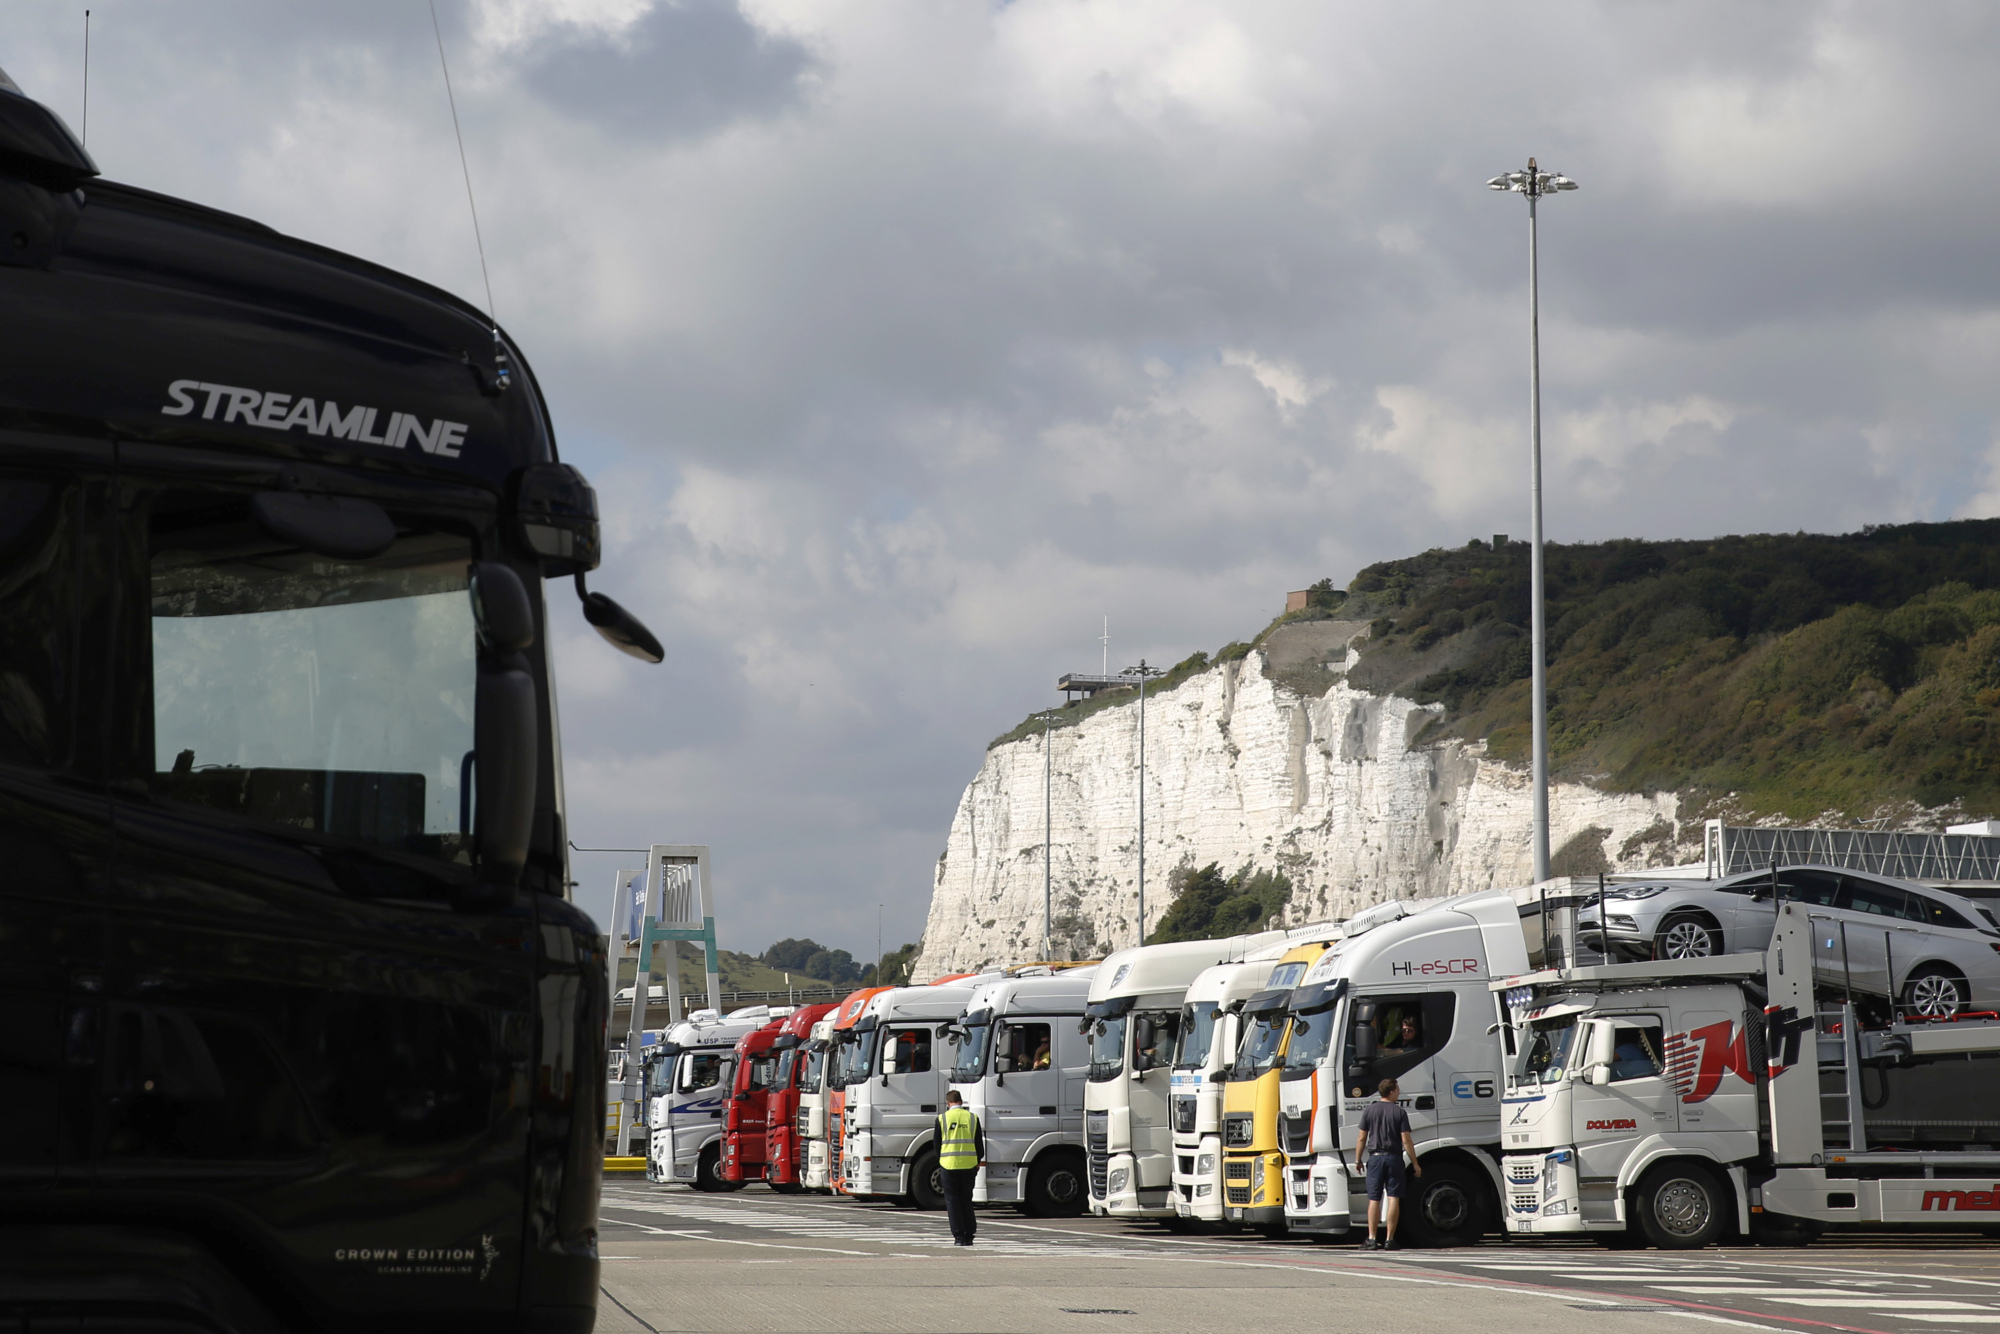 A cargo truck disembarks a cross channel ferry while others wait to board at the Port of Dover.